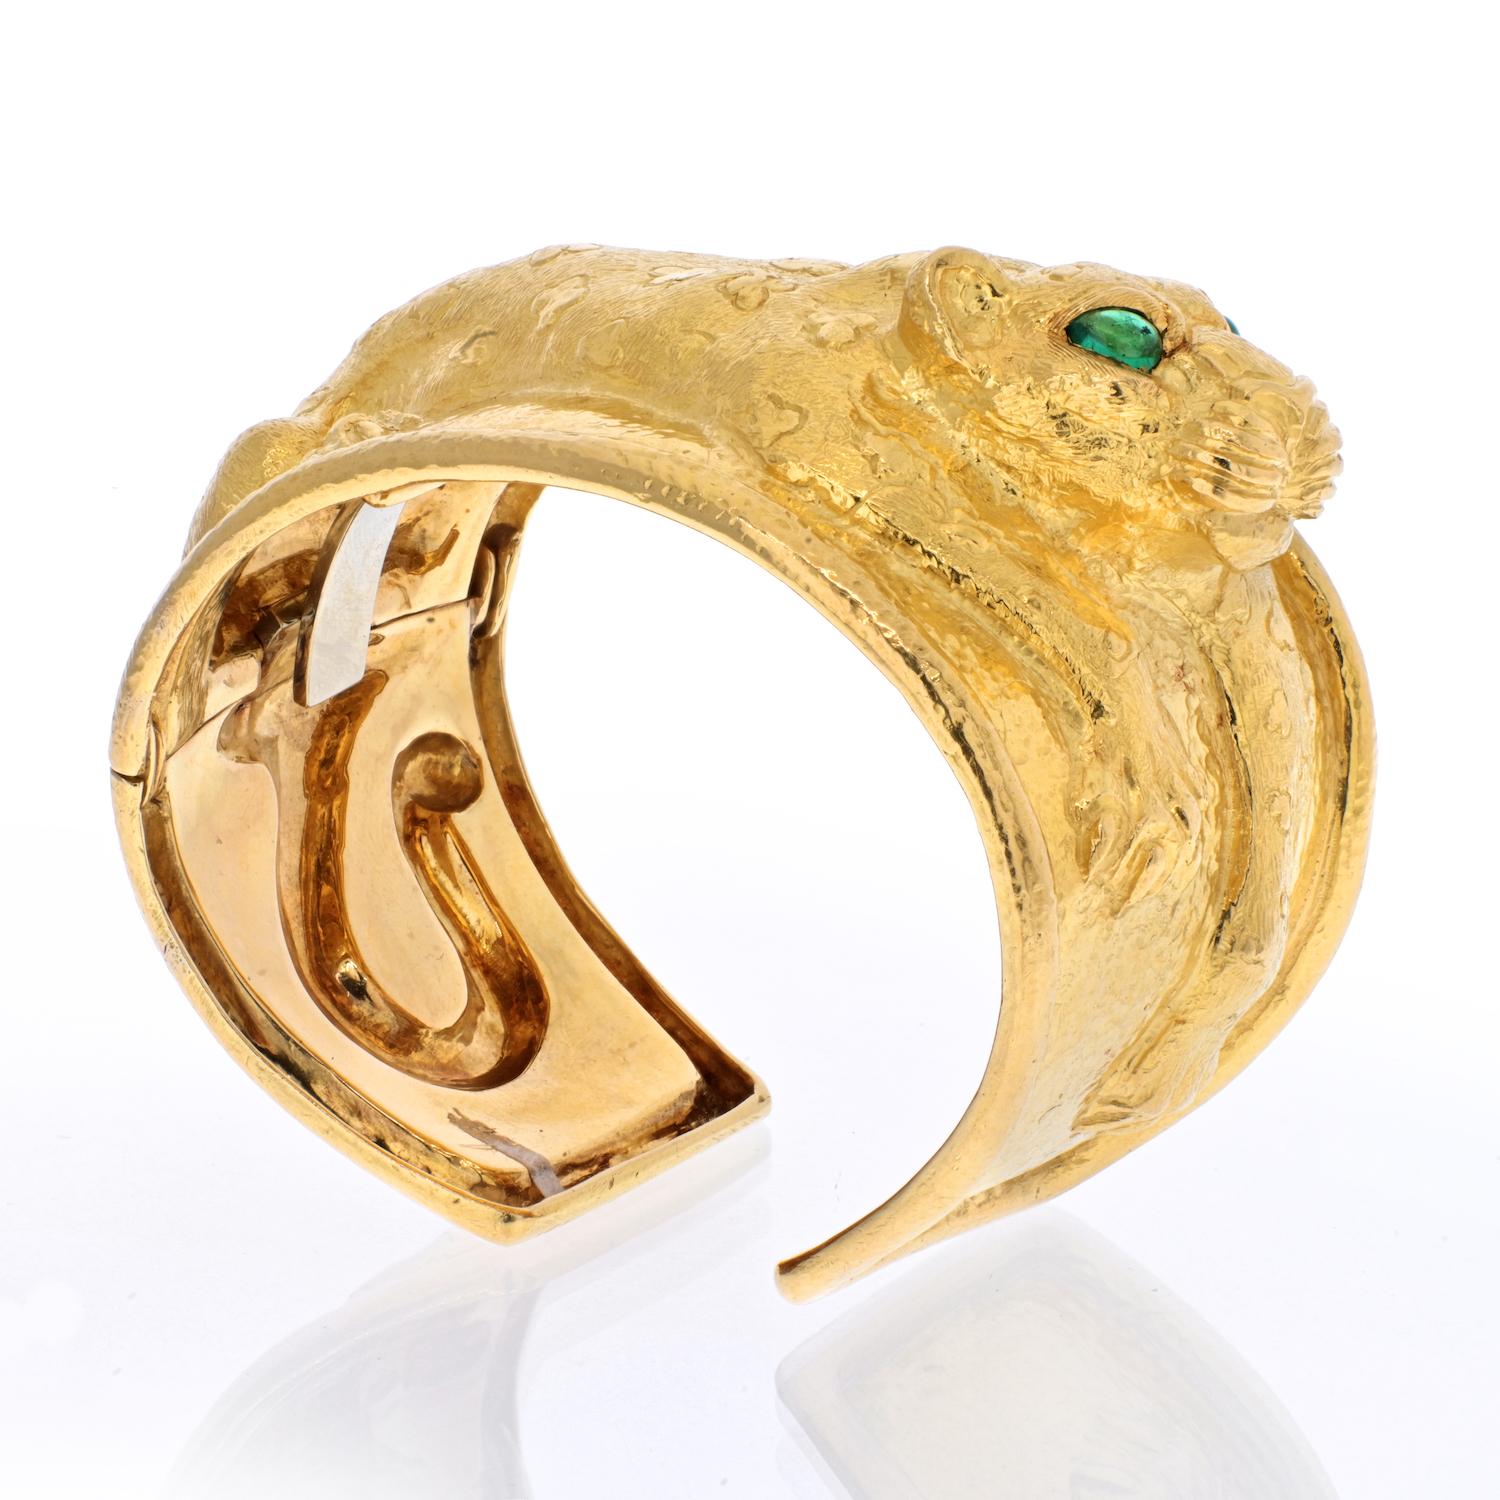 David Webb 'Repoussé Leopard' cuff bangle crafted in 18 karat yellow gold with enchanting emerald eyes. . Repoussé leopard cuff bracelet set with two pear-shaped emerald eyes, the emeralds weighing 0.7 total carats, in textured 18k yellow gold.